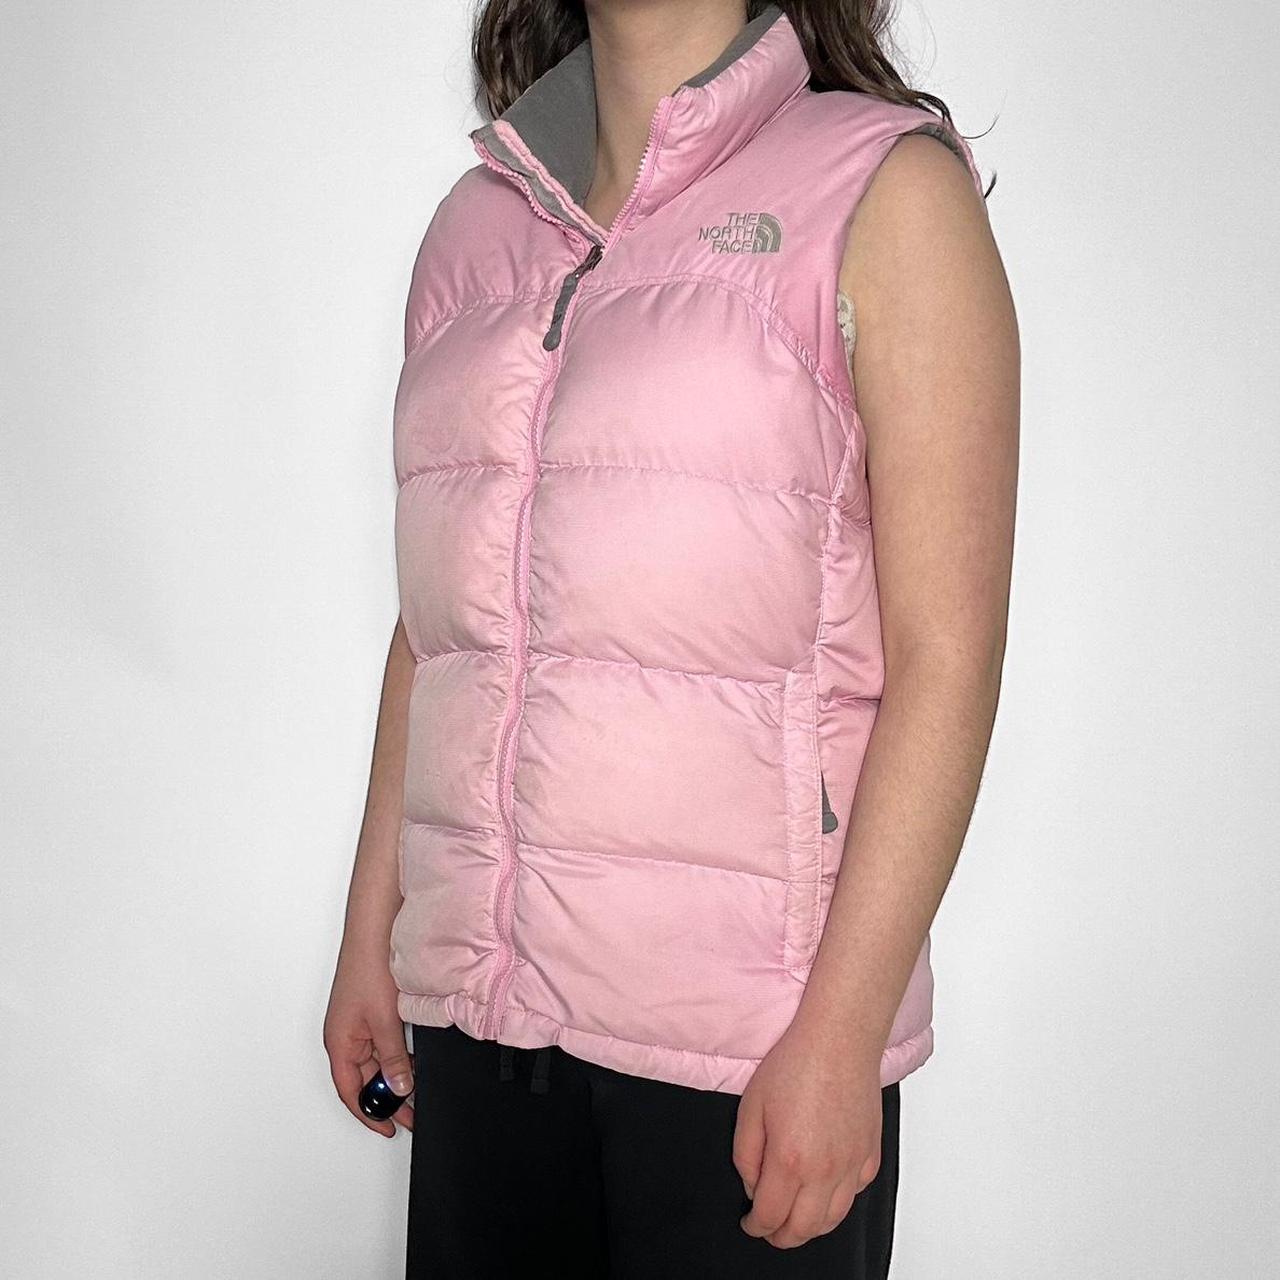 Vintage 90s The North Face 700 Nuptse puffer gilet in baby pink